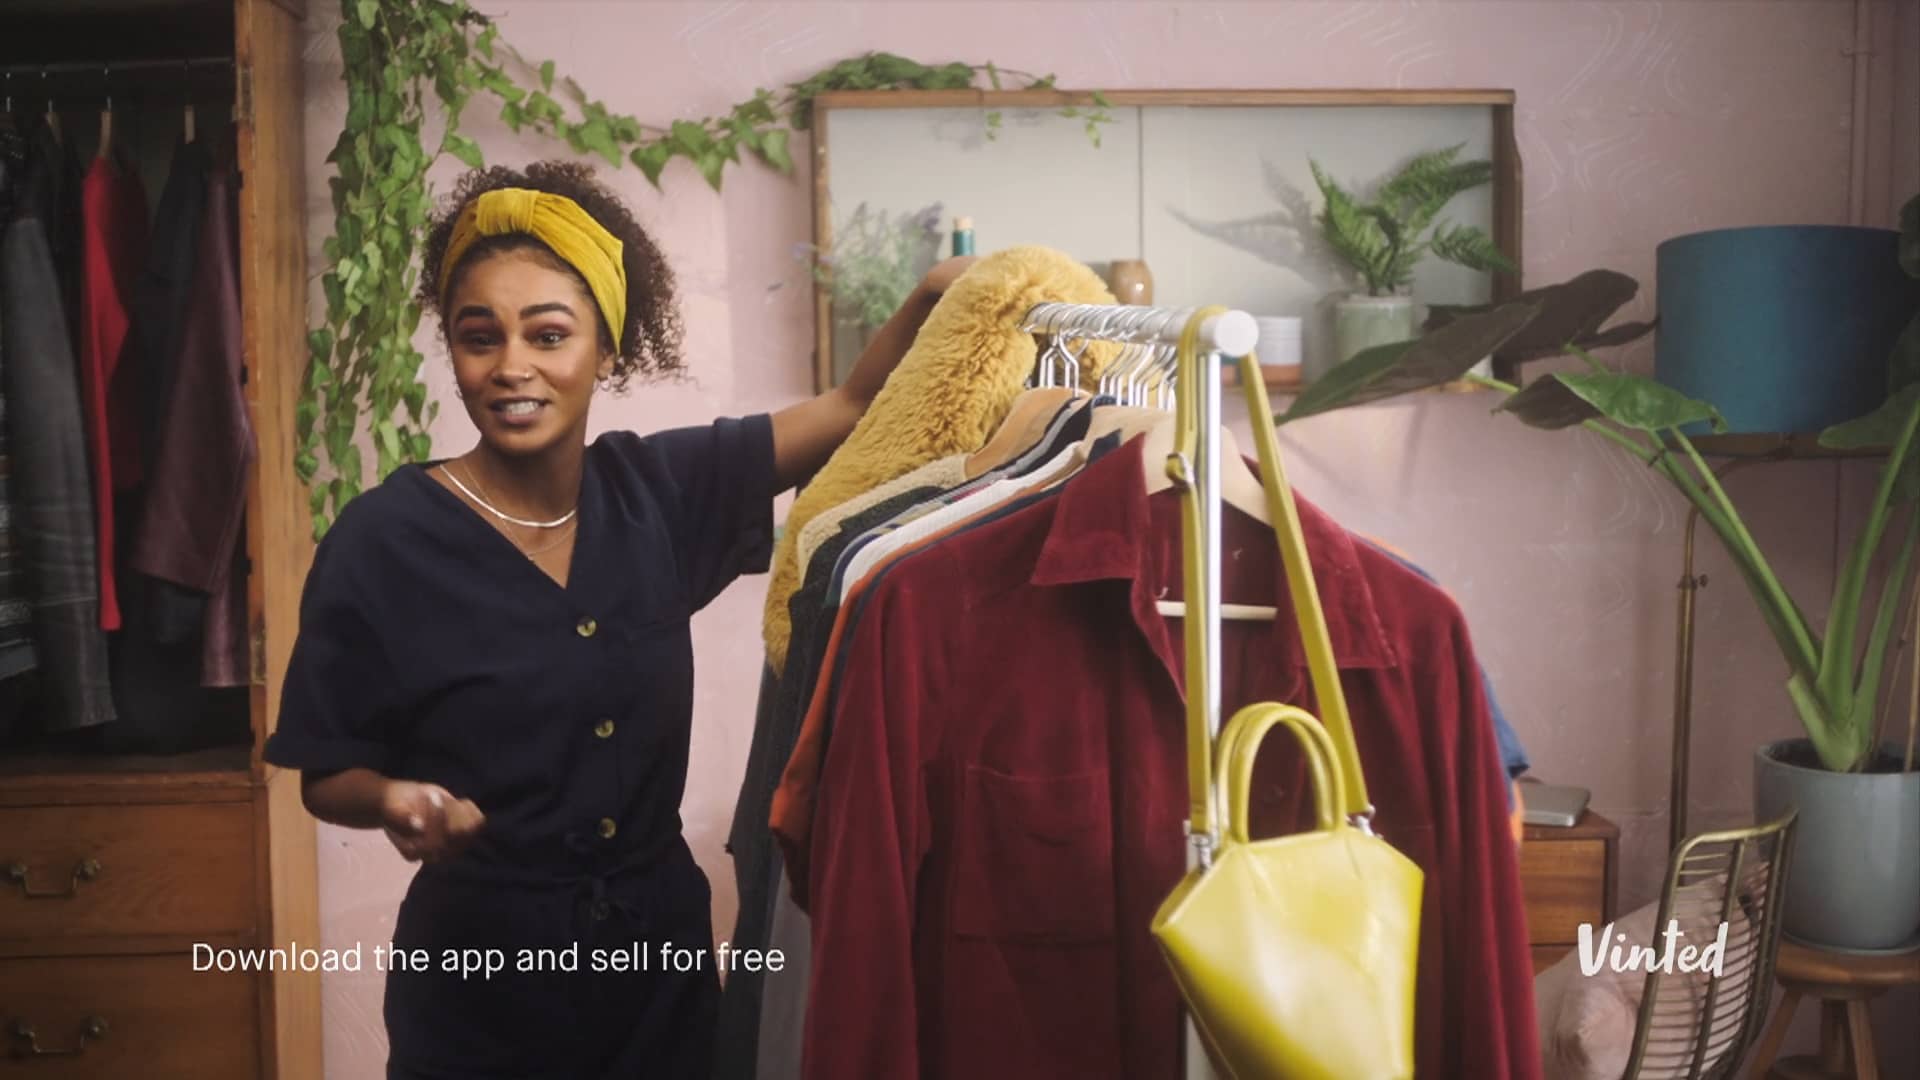 Vinted: Decluttering 101 (TVC) on Vimeo